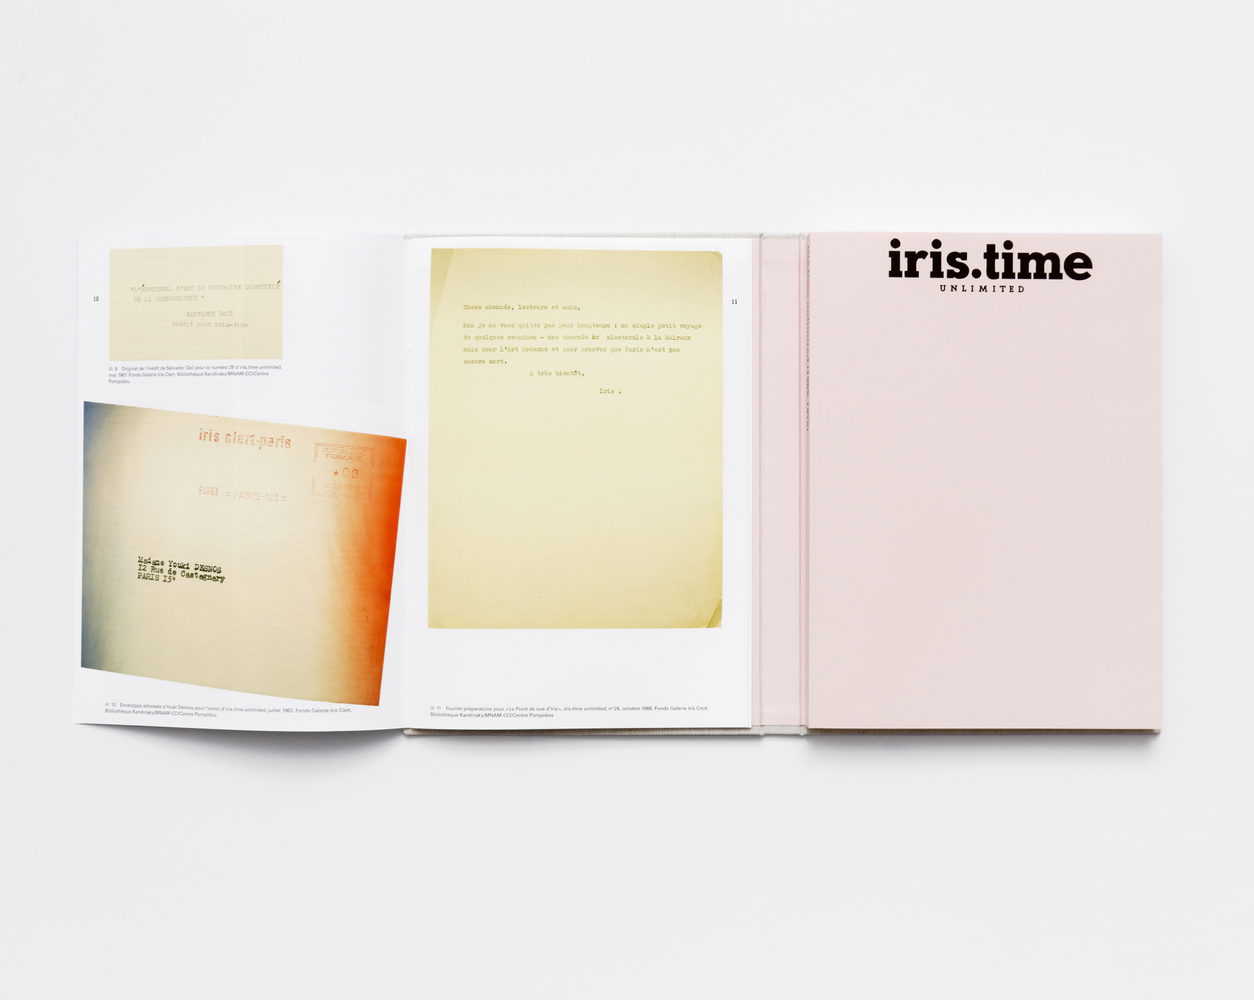 iris.time unlimited (1962-1975) -  